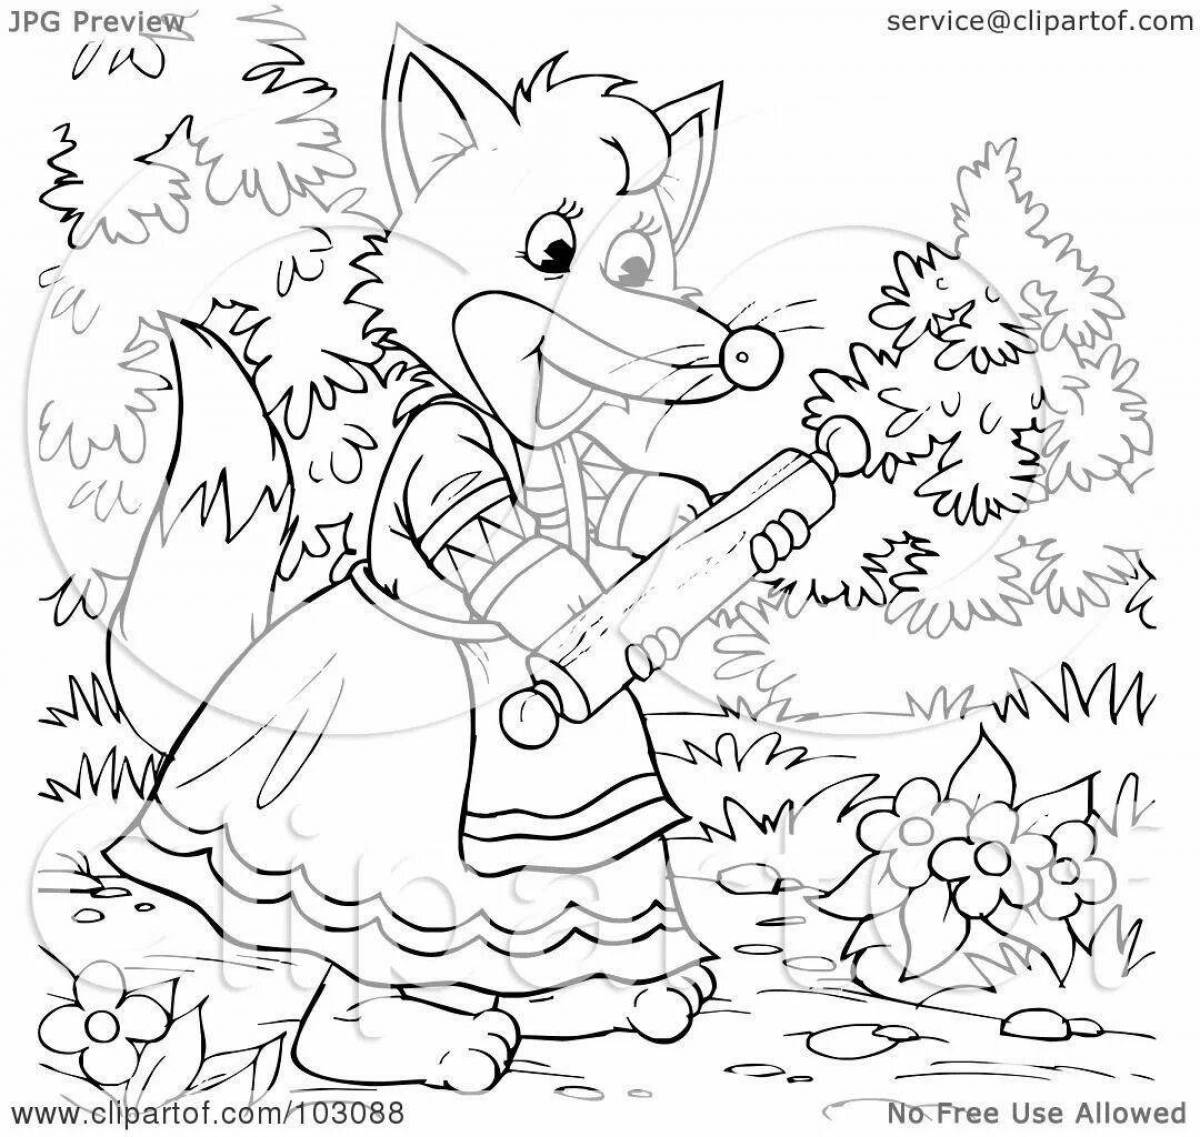 Colorful snowman and fox coloring book